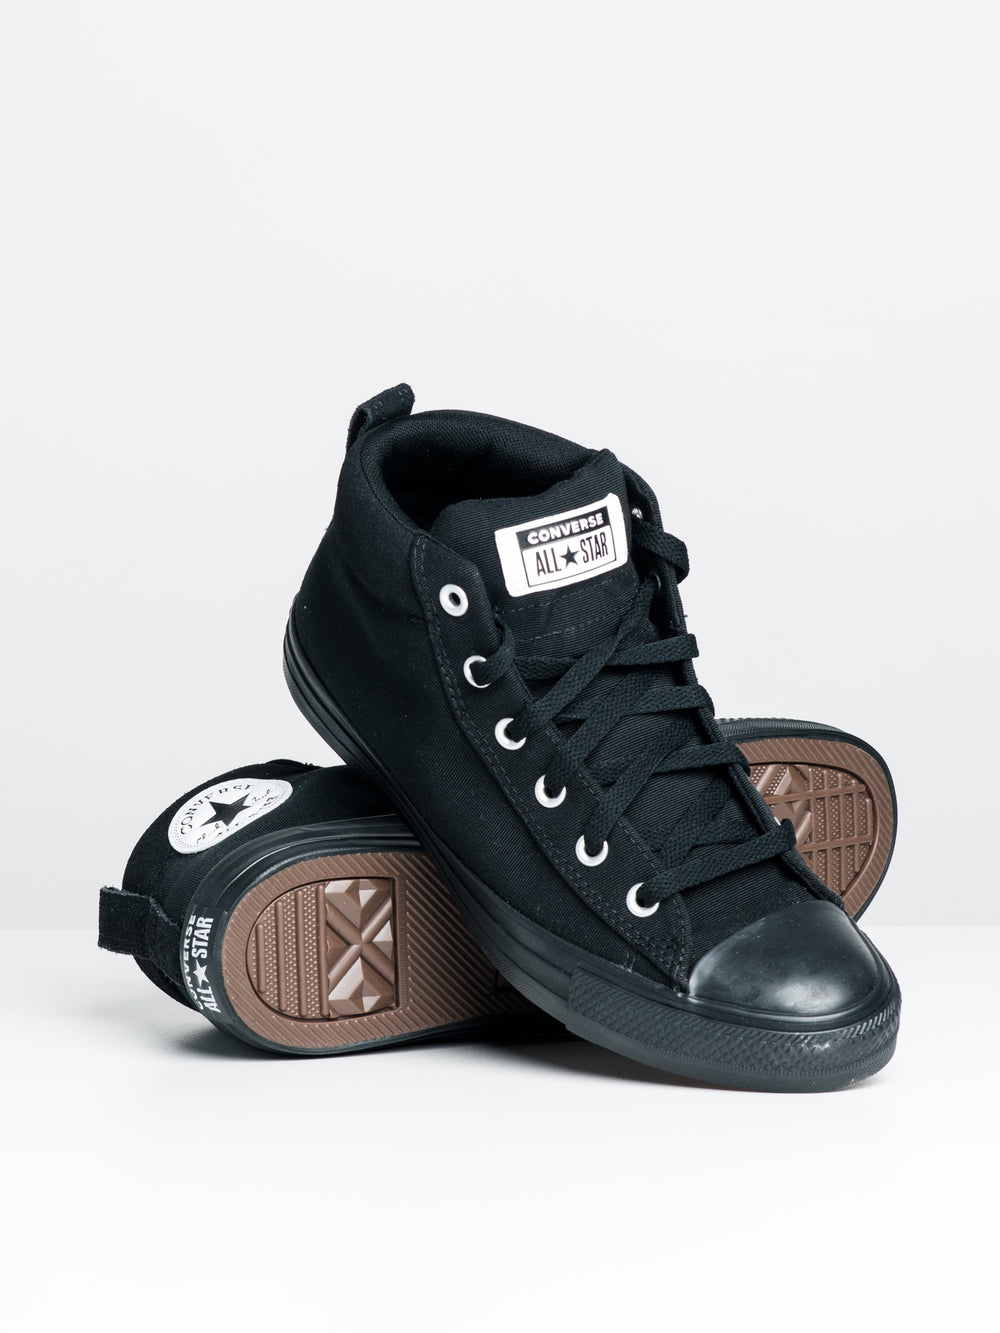 CONVERSE CHUCK TAYLOR ALL STAR STREET MID TOP SNEAKERS POUR HOMME - DÉSTOCKAGE